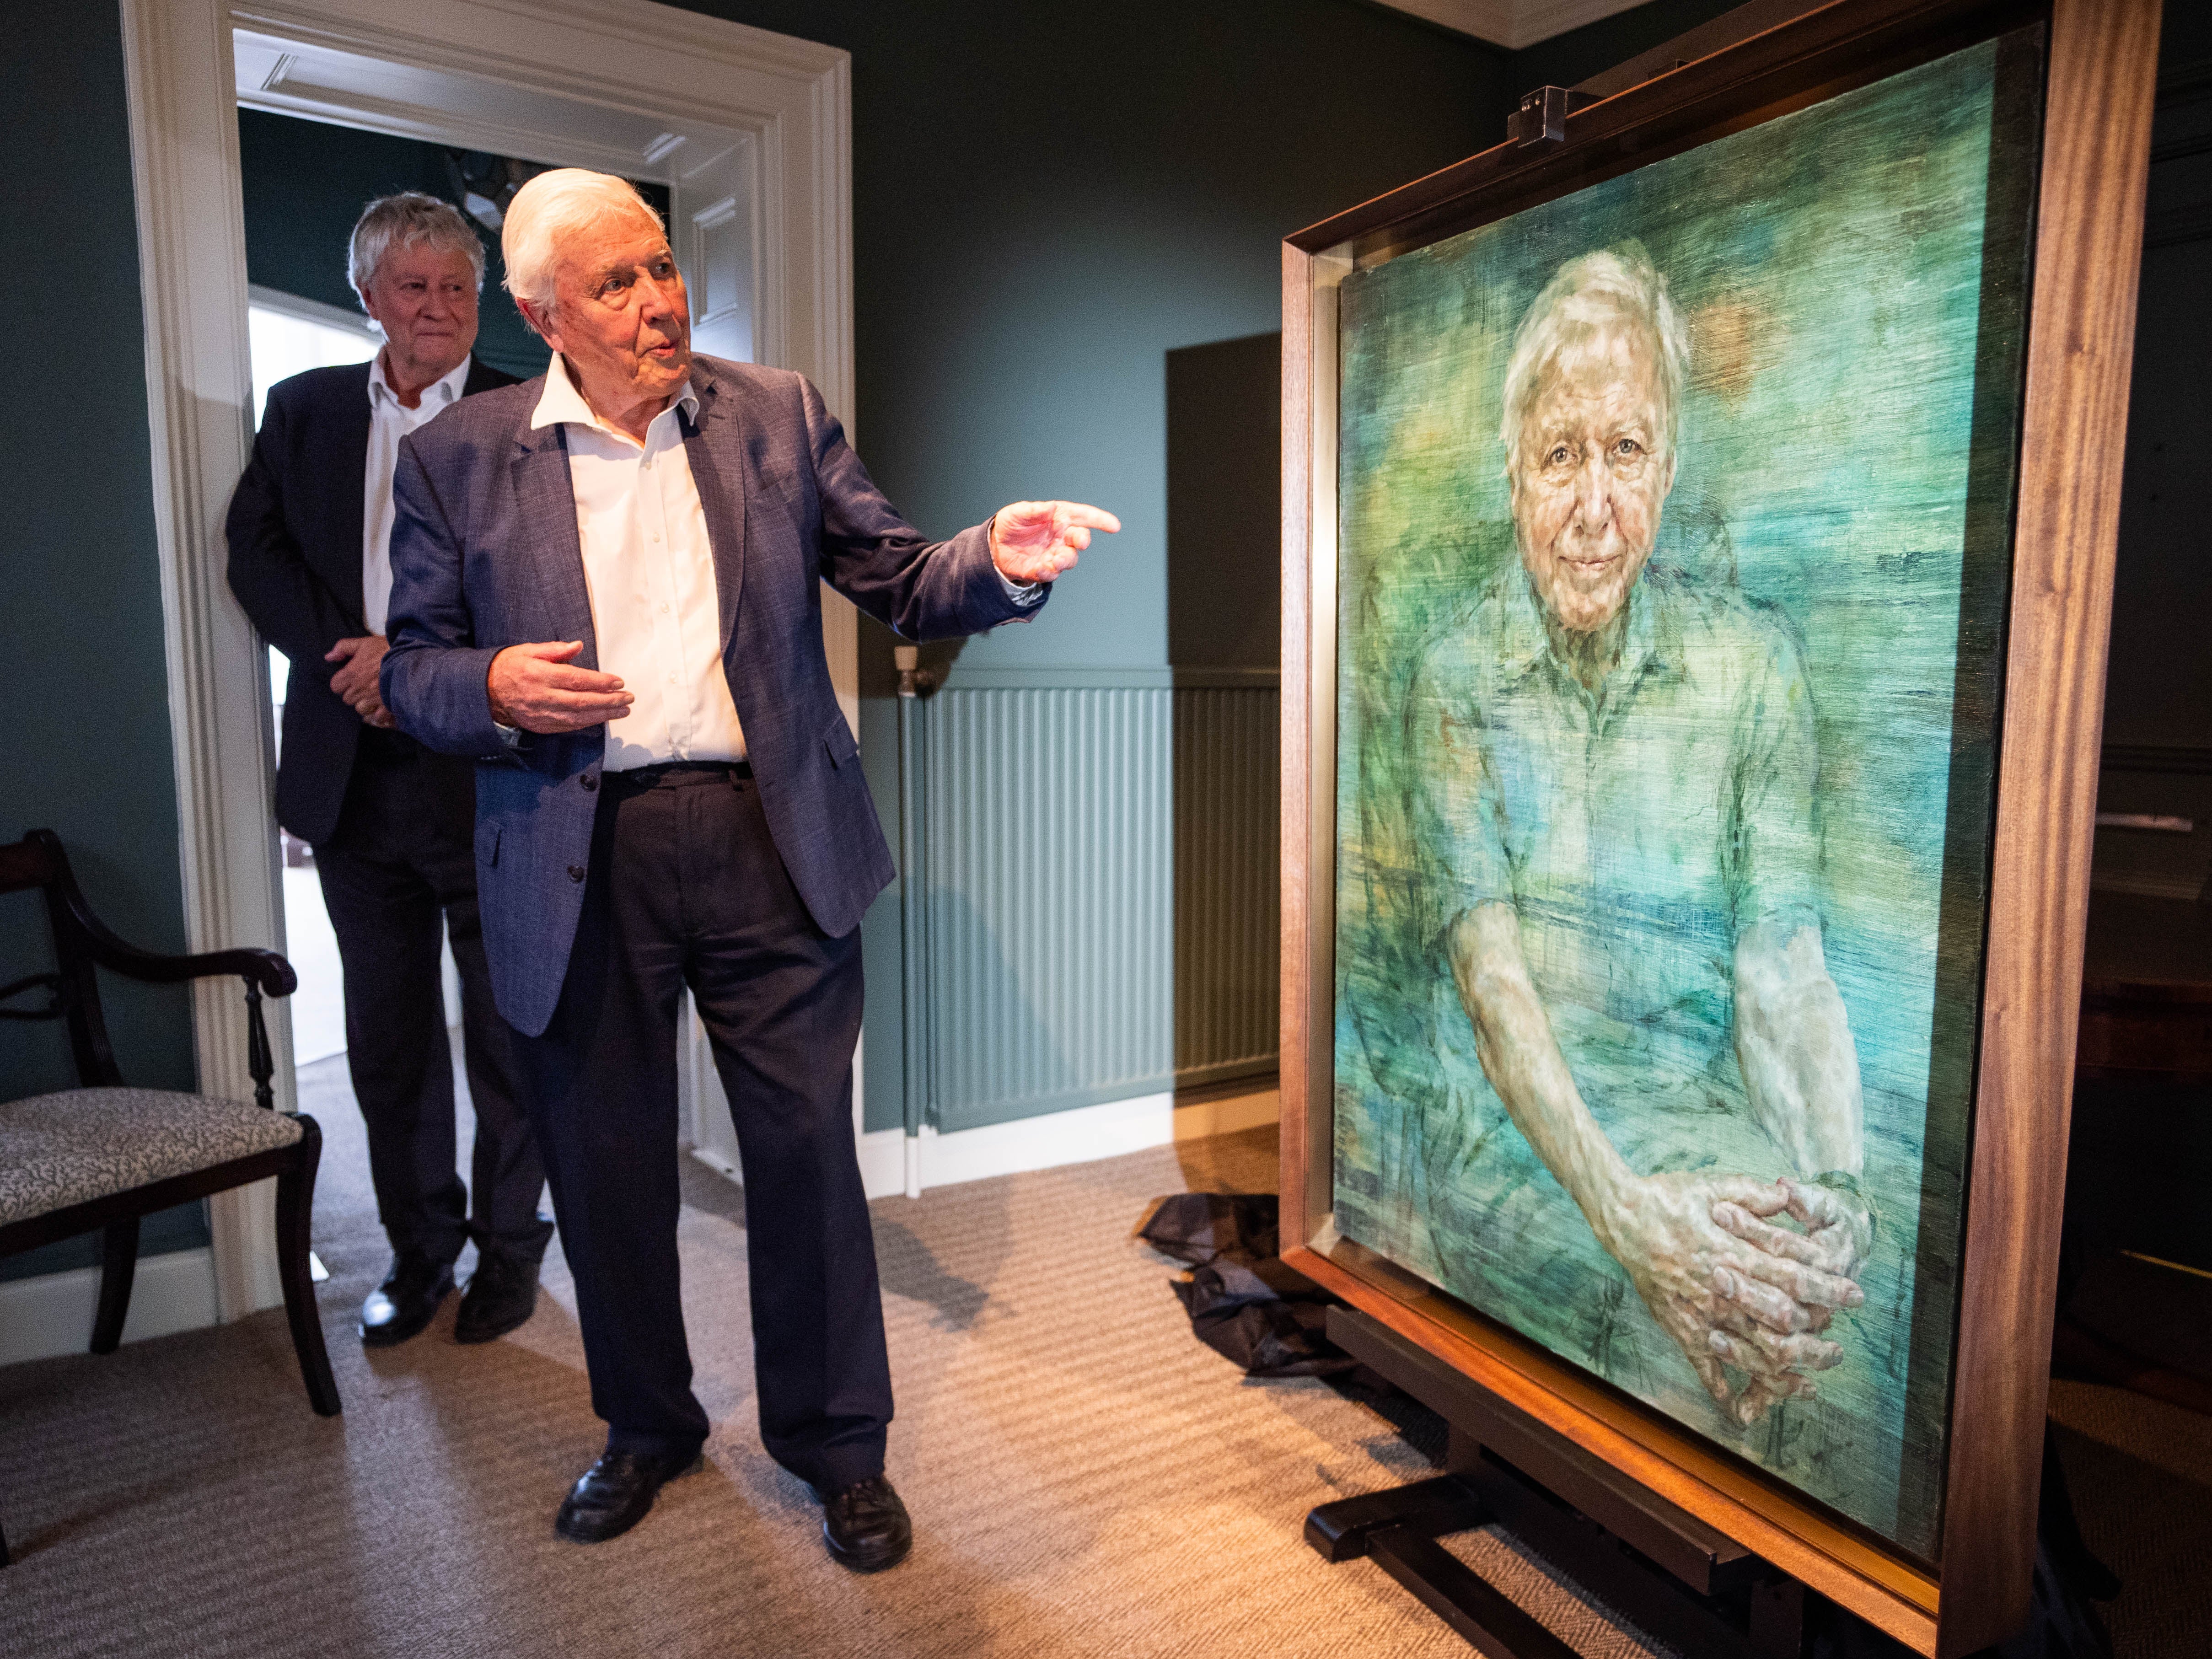 Sir David Attenborough during the unveiling of a portrait of the broadcaster and conservationist painted by Jonathan Yeo